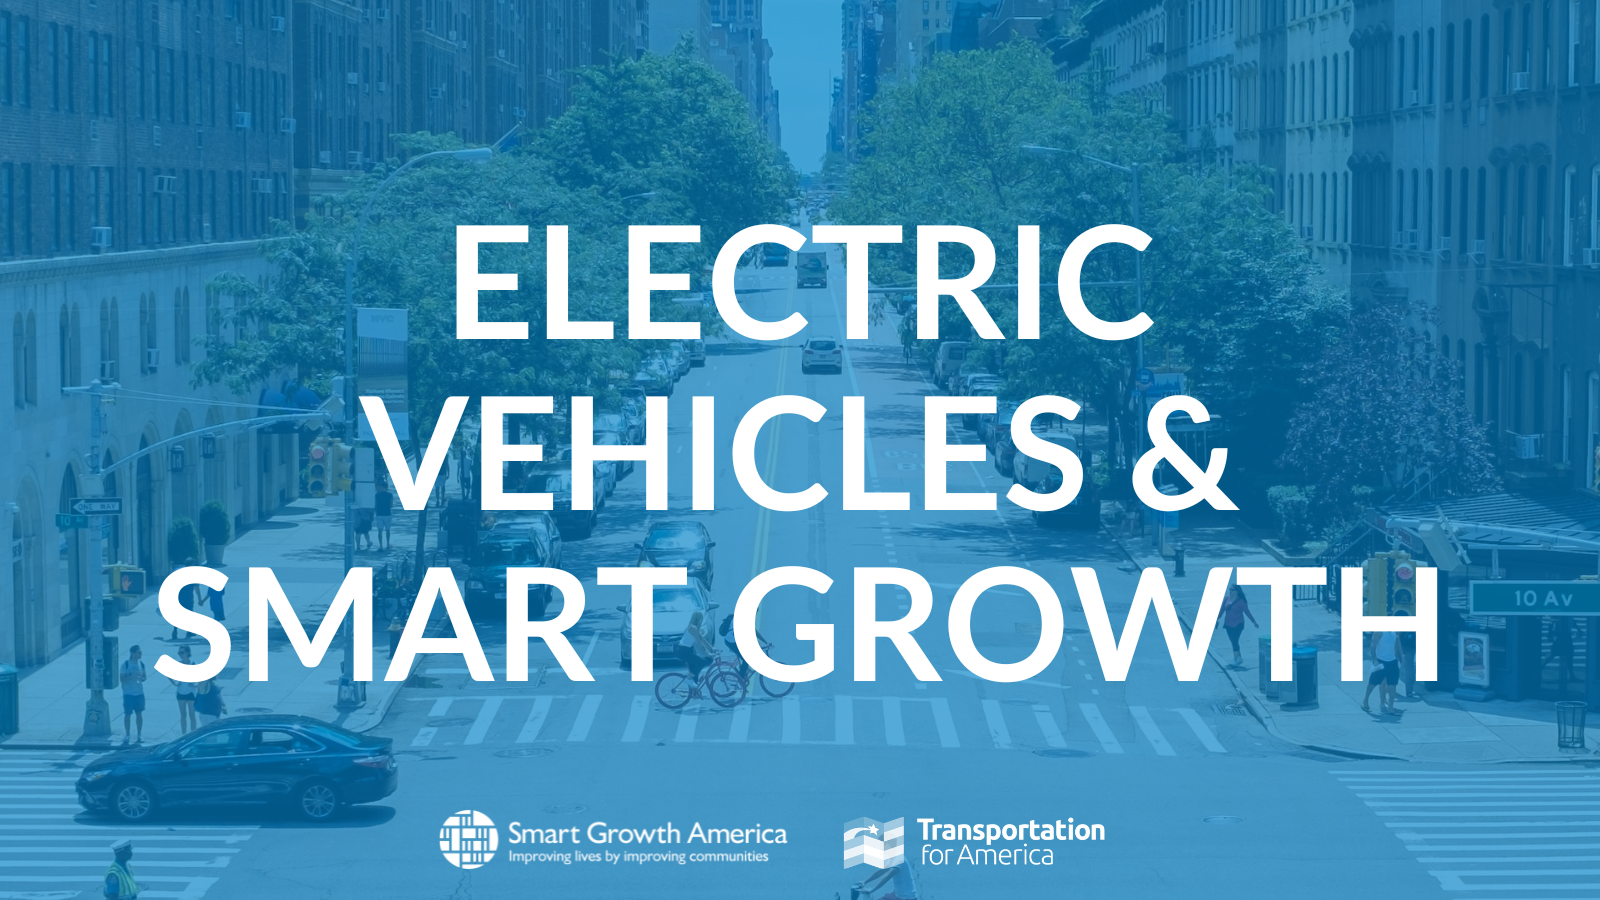 We can advance electric vehicles and smart growth at the same time